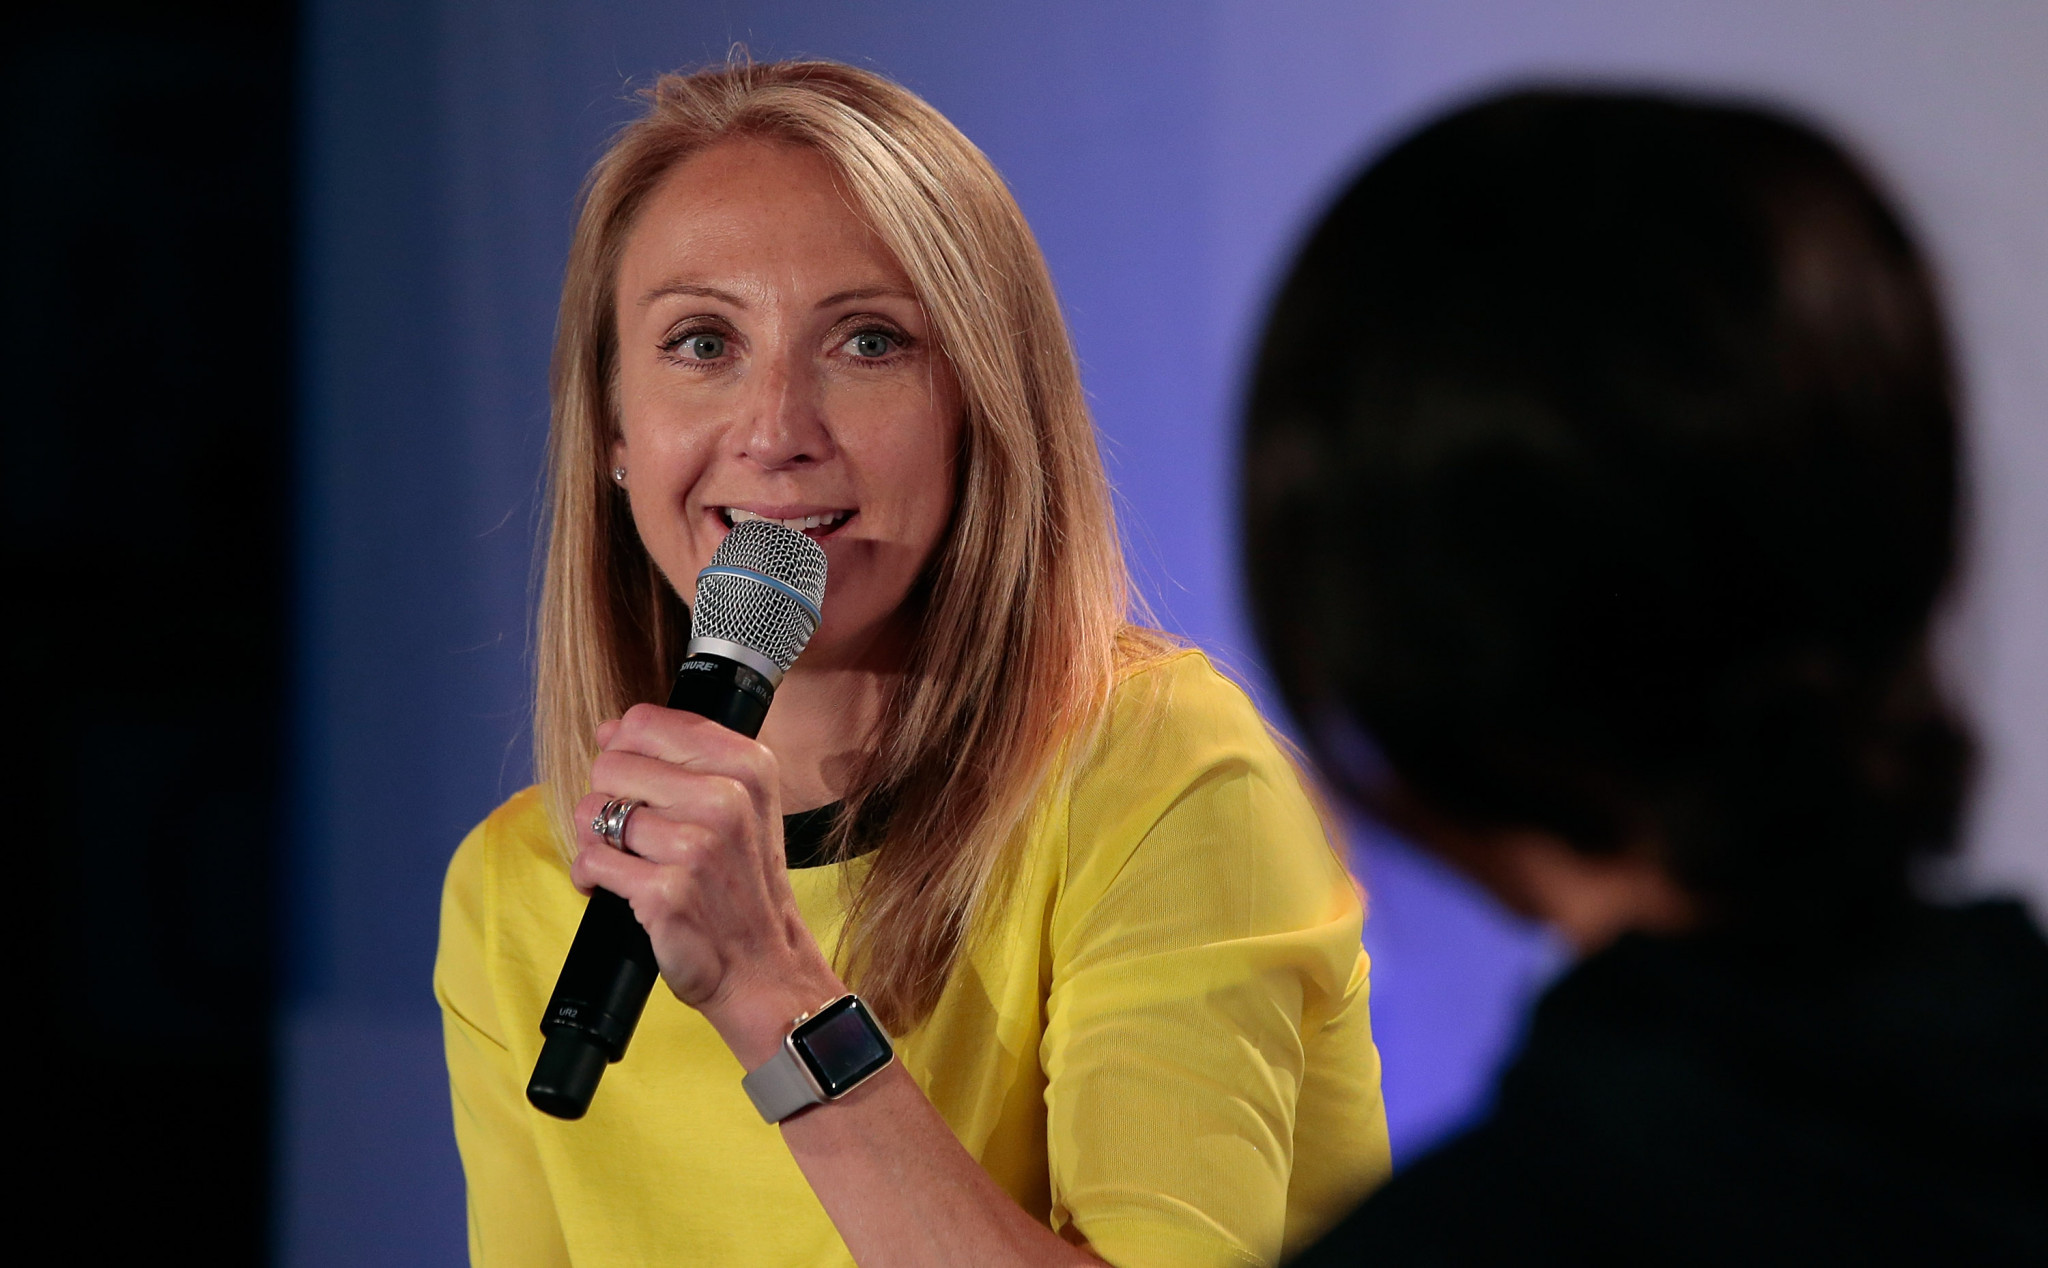 Paula Radcliffe has criticised the IOC for their response to the Russian doping scandal ©Getty Images